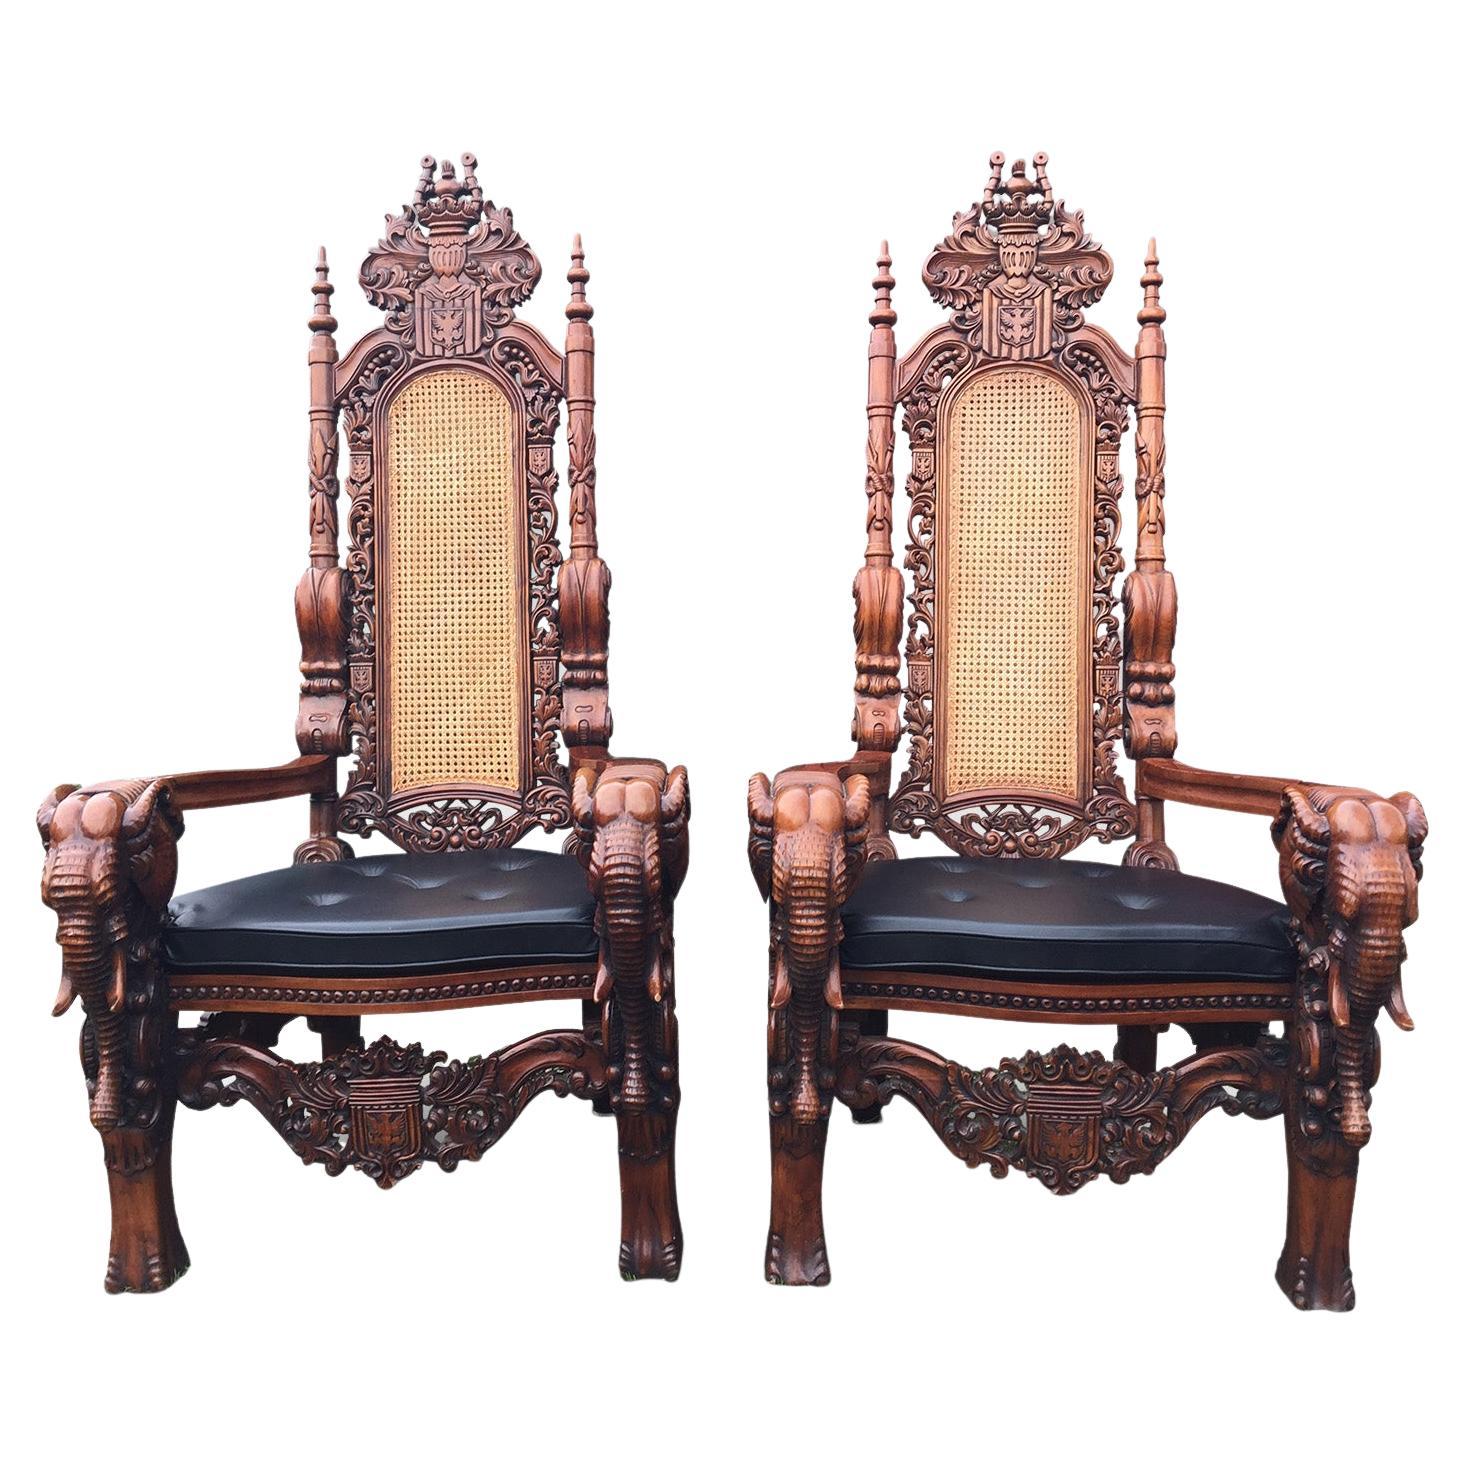 Antique Pair of Top Quality Large Pair of Carved Walnut Elephant Throne Chairs For Sale